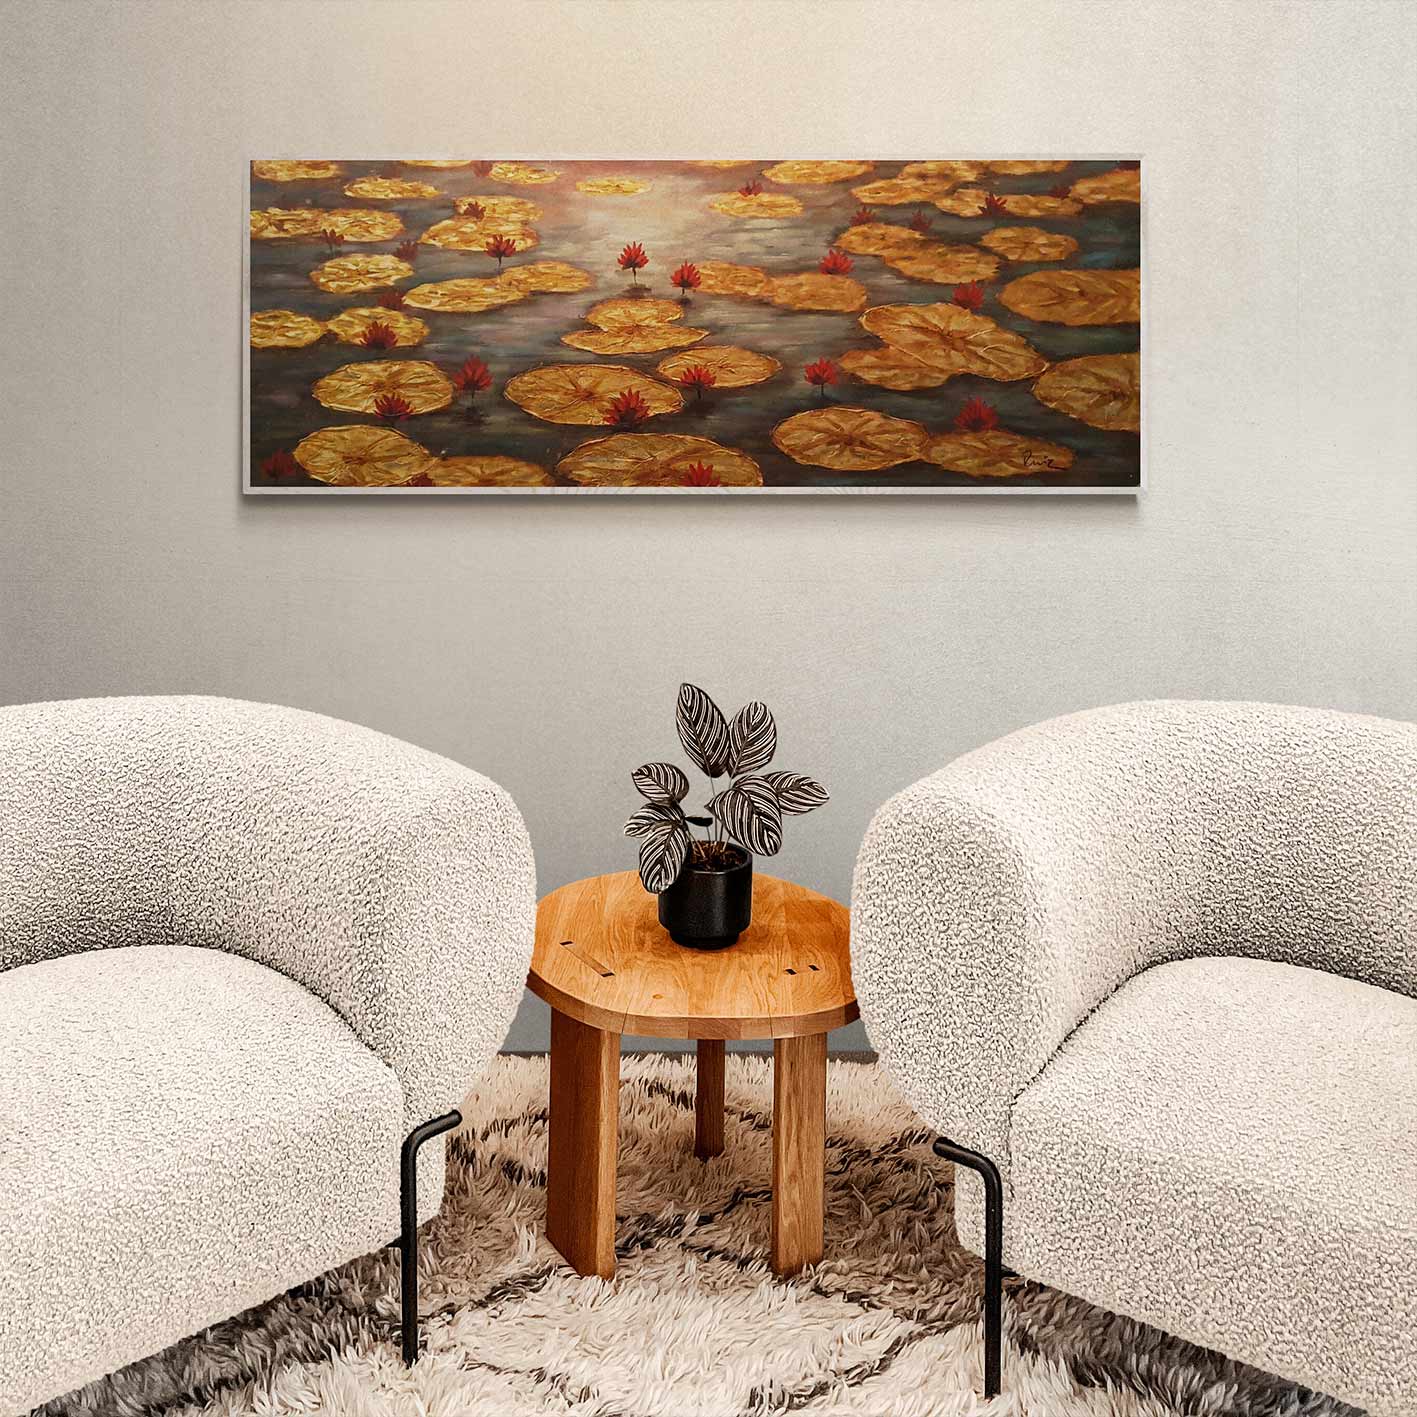 Gold Water Lilies Painting 120x40 cm